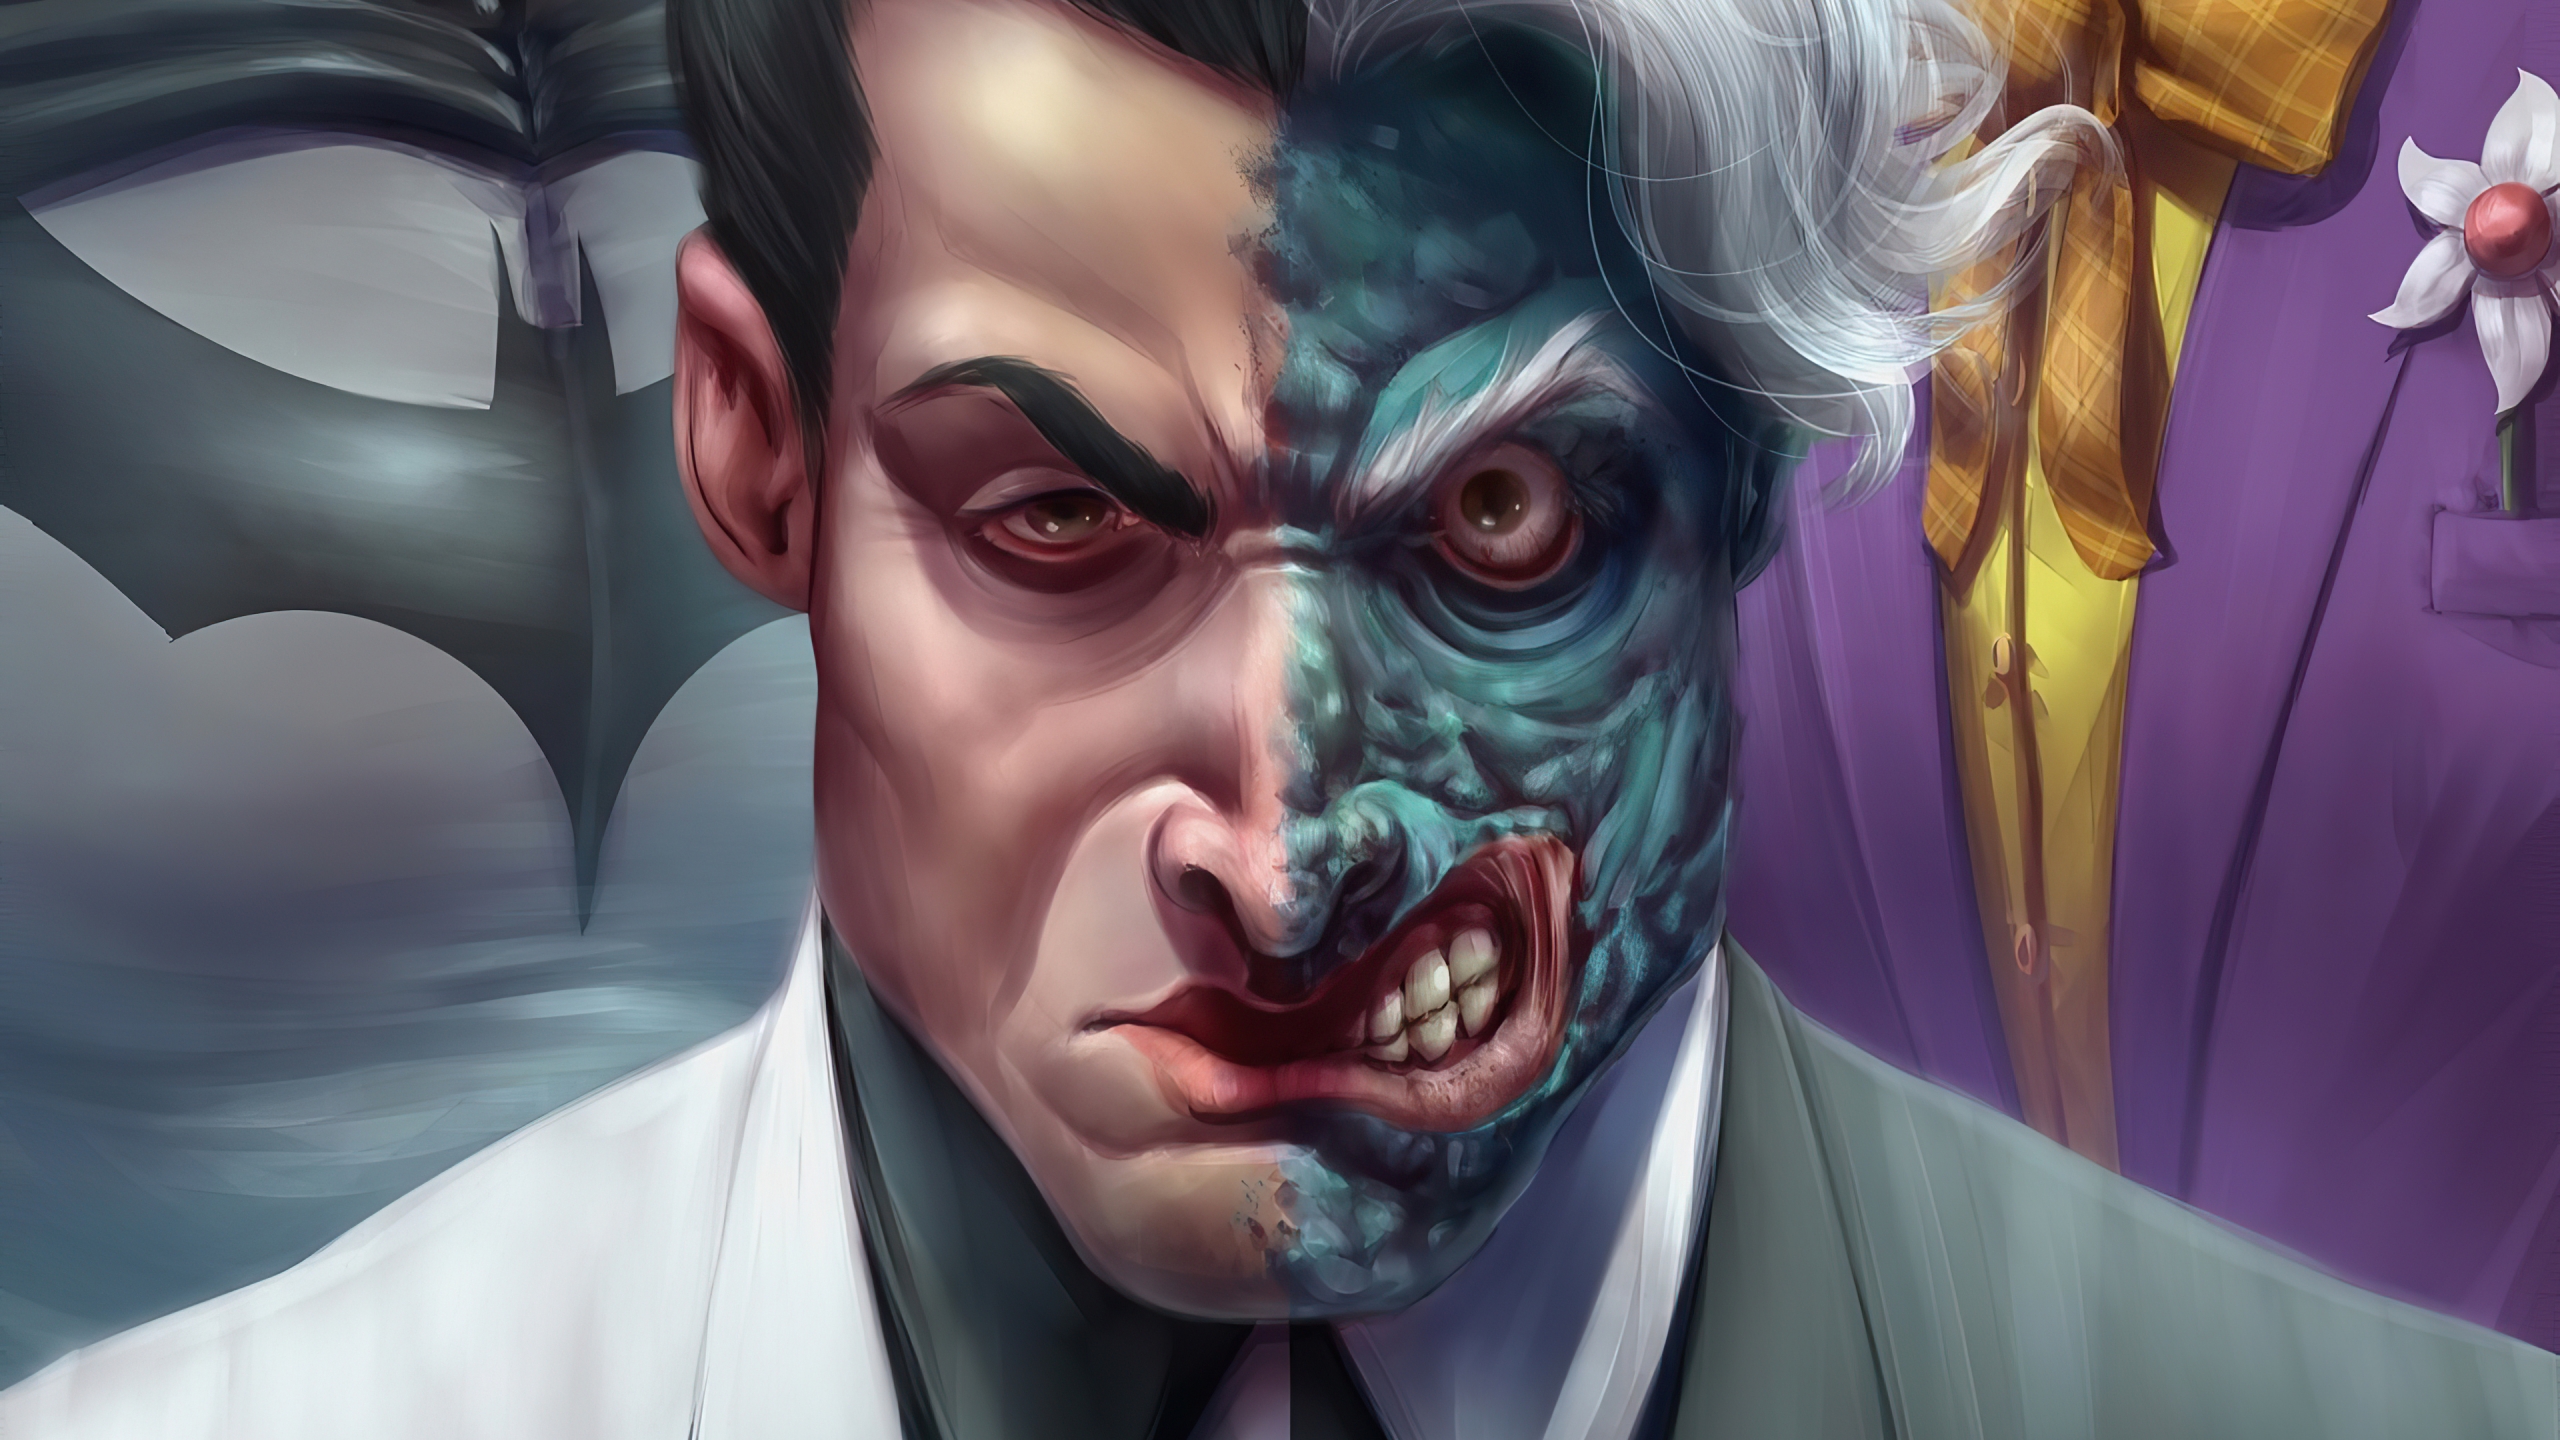 Two face character Wallpaper 4k Ultra HD ID:5968